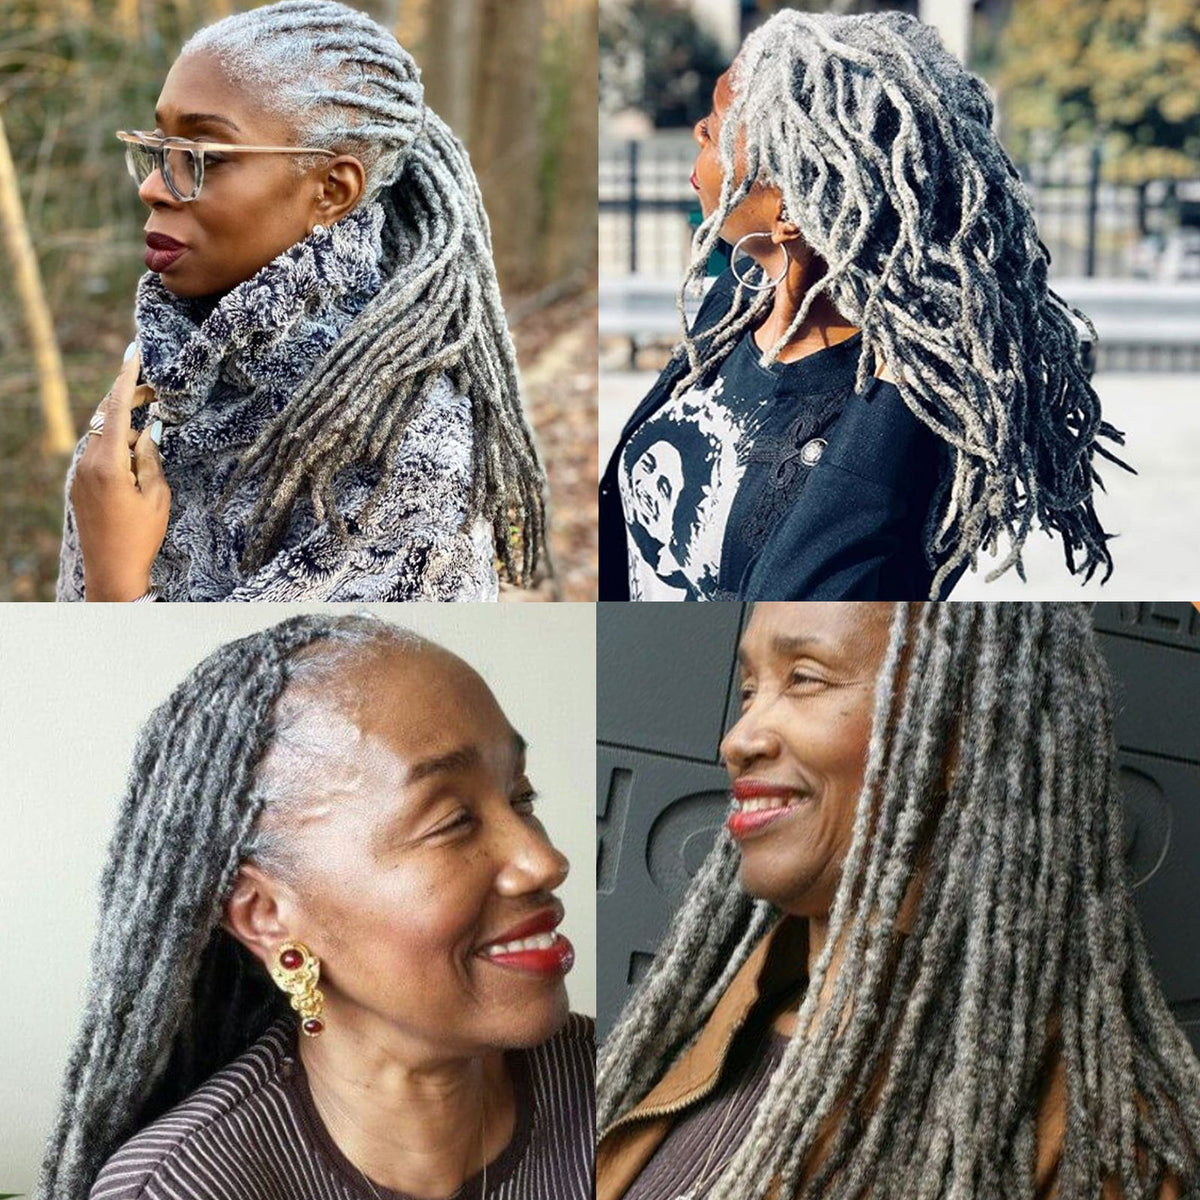 100% Human Hair Dreadlock Extensions 16 Inch 10 Strands Handmade Natural Loc Extensions Human Hair Dreads Extensions For Woman & Men Can Be Dyed/Bleached  (16inch 10 strands, 0.6cm Salt & Pepper)